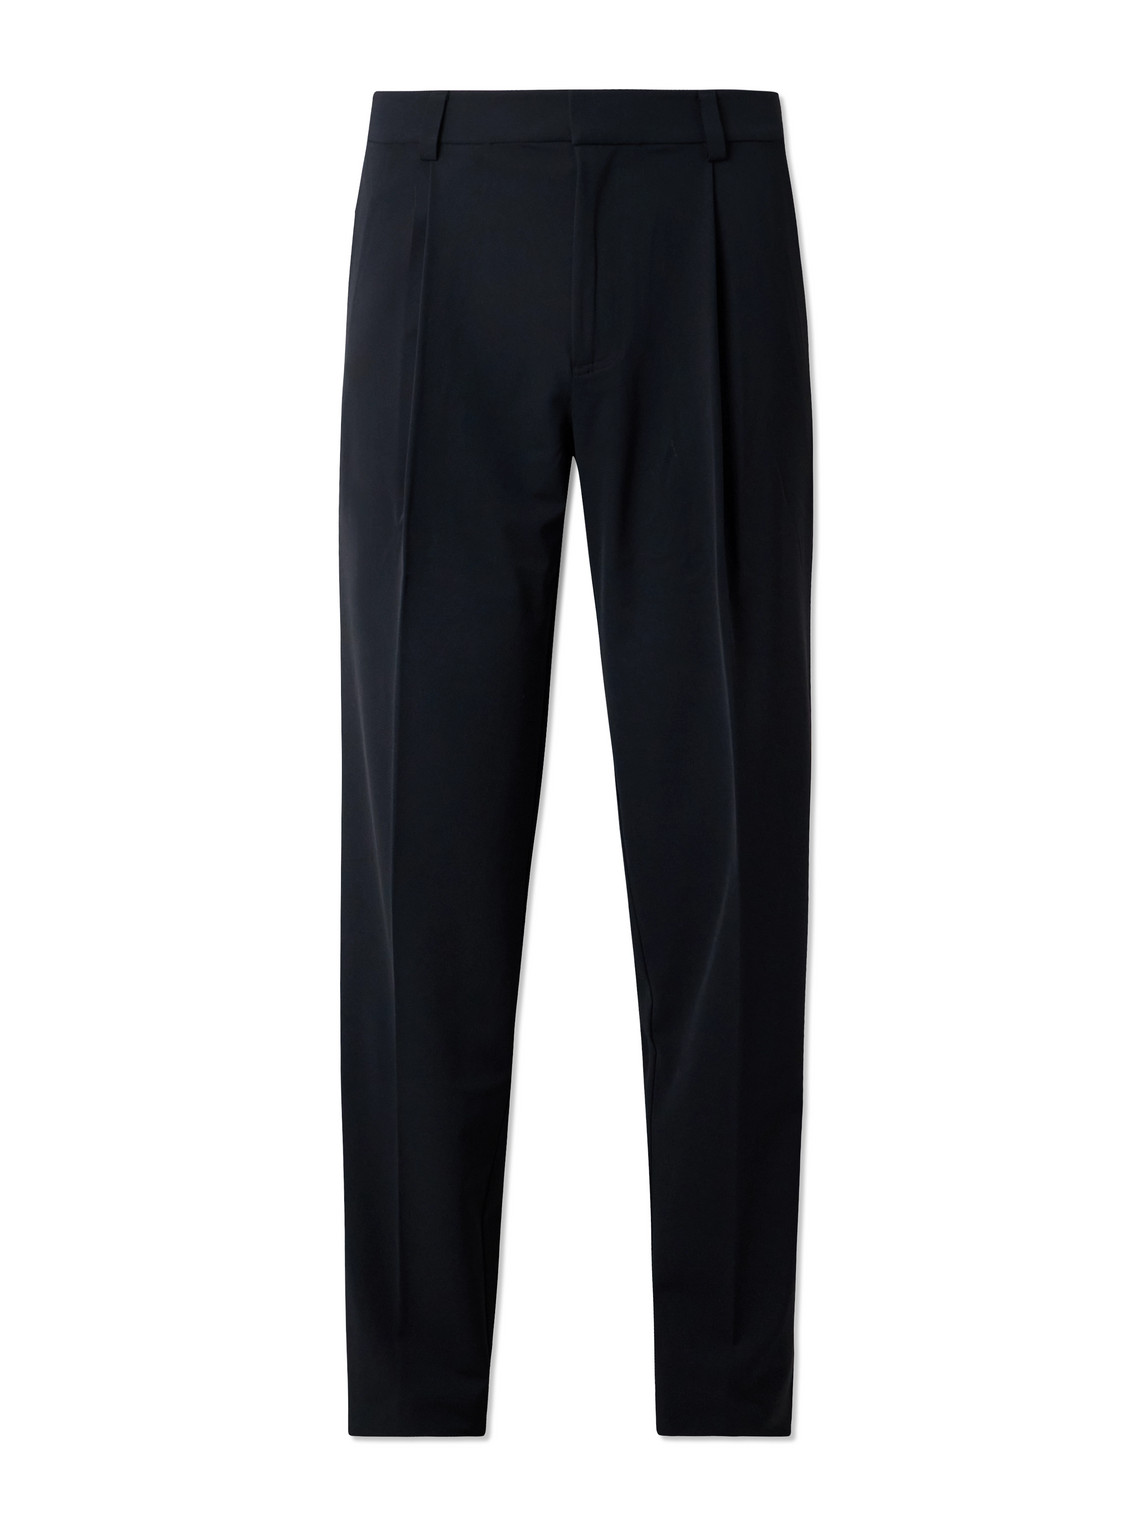 Mr P. - G/Fore Tapered Pleated Stretch-Twill Trousers - Men - Black - 32 von Mr P.